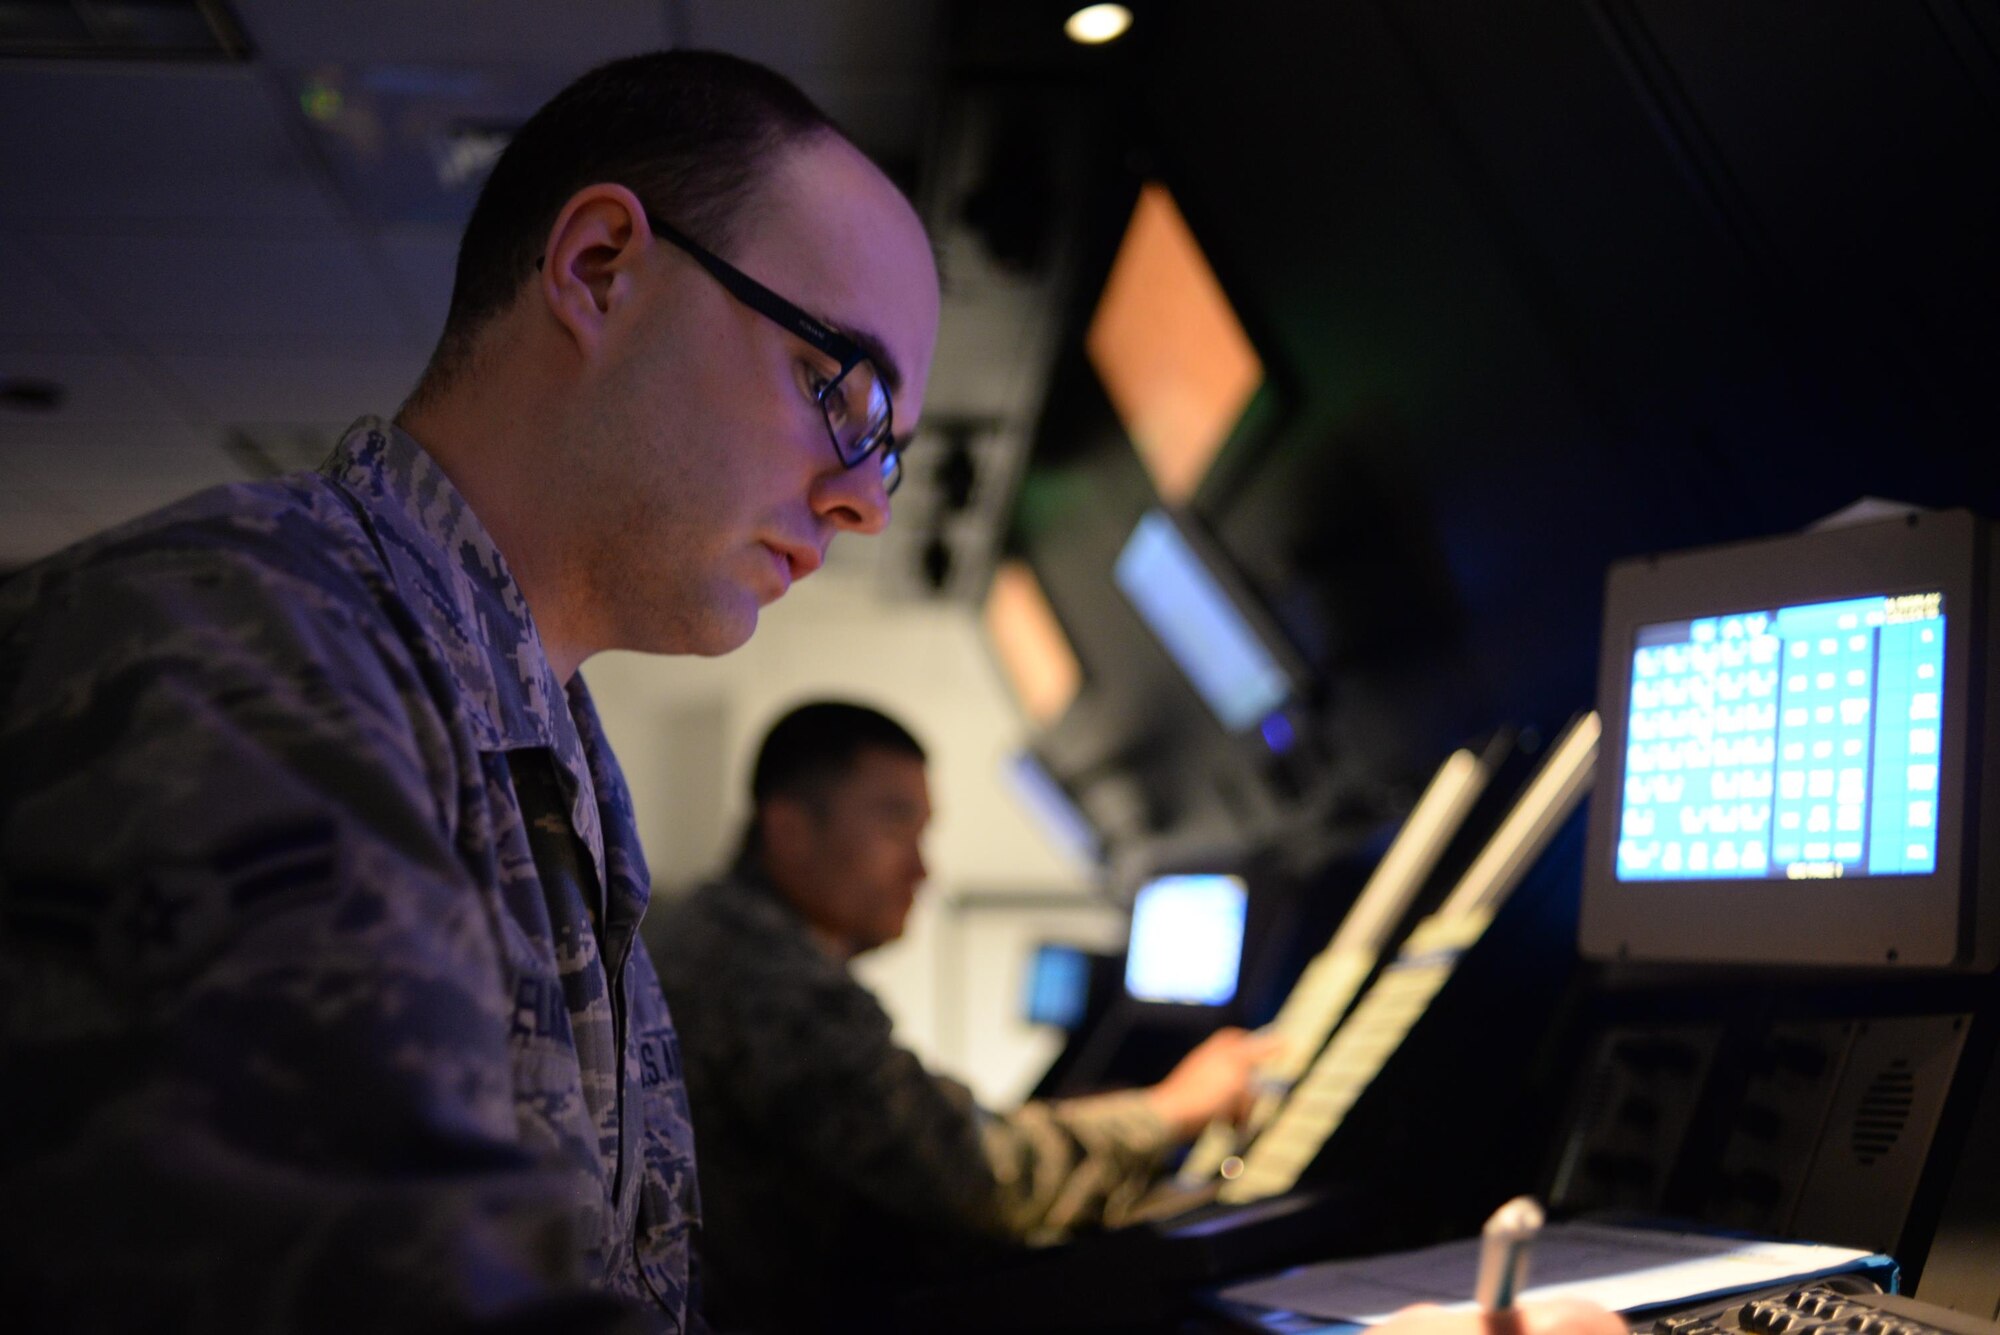 Airman 1st Class Alan Elkins, 14th Operation Support Squadron Air Traffic Controller, practices a position in the Radar Approach Control room May 31, 2017, on Columbus
Air Force Base, Mississippi. The RAPCON is where Air Traffic Controllers direct and coordinate flight paths for aircraft in flight.U.S. Air Force photo by Airman 1st Class Keith Holcomb)

